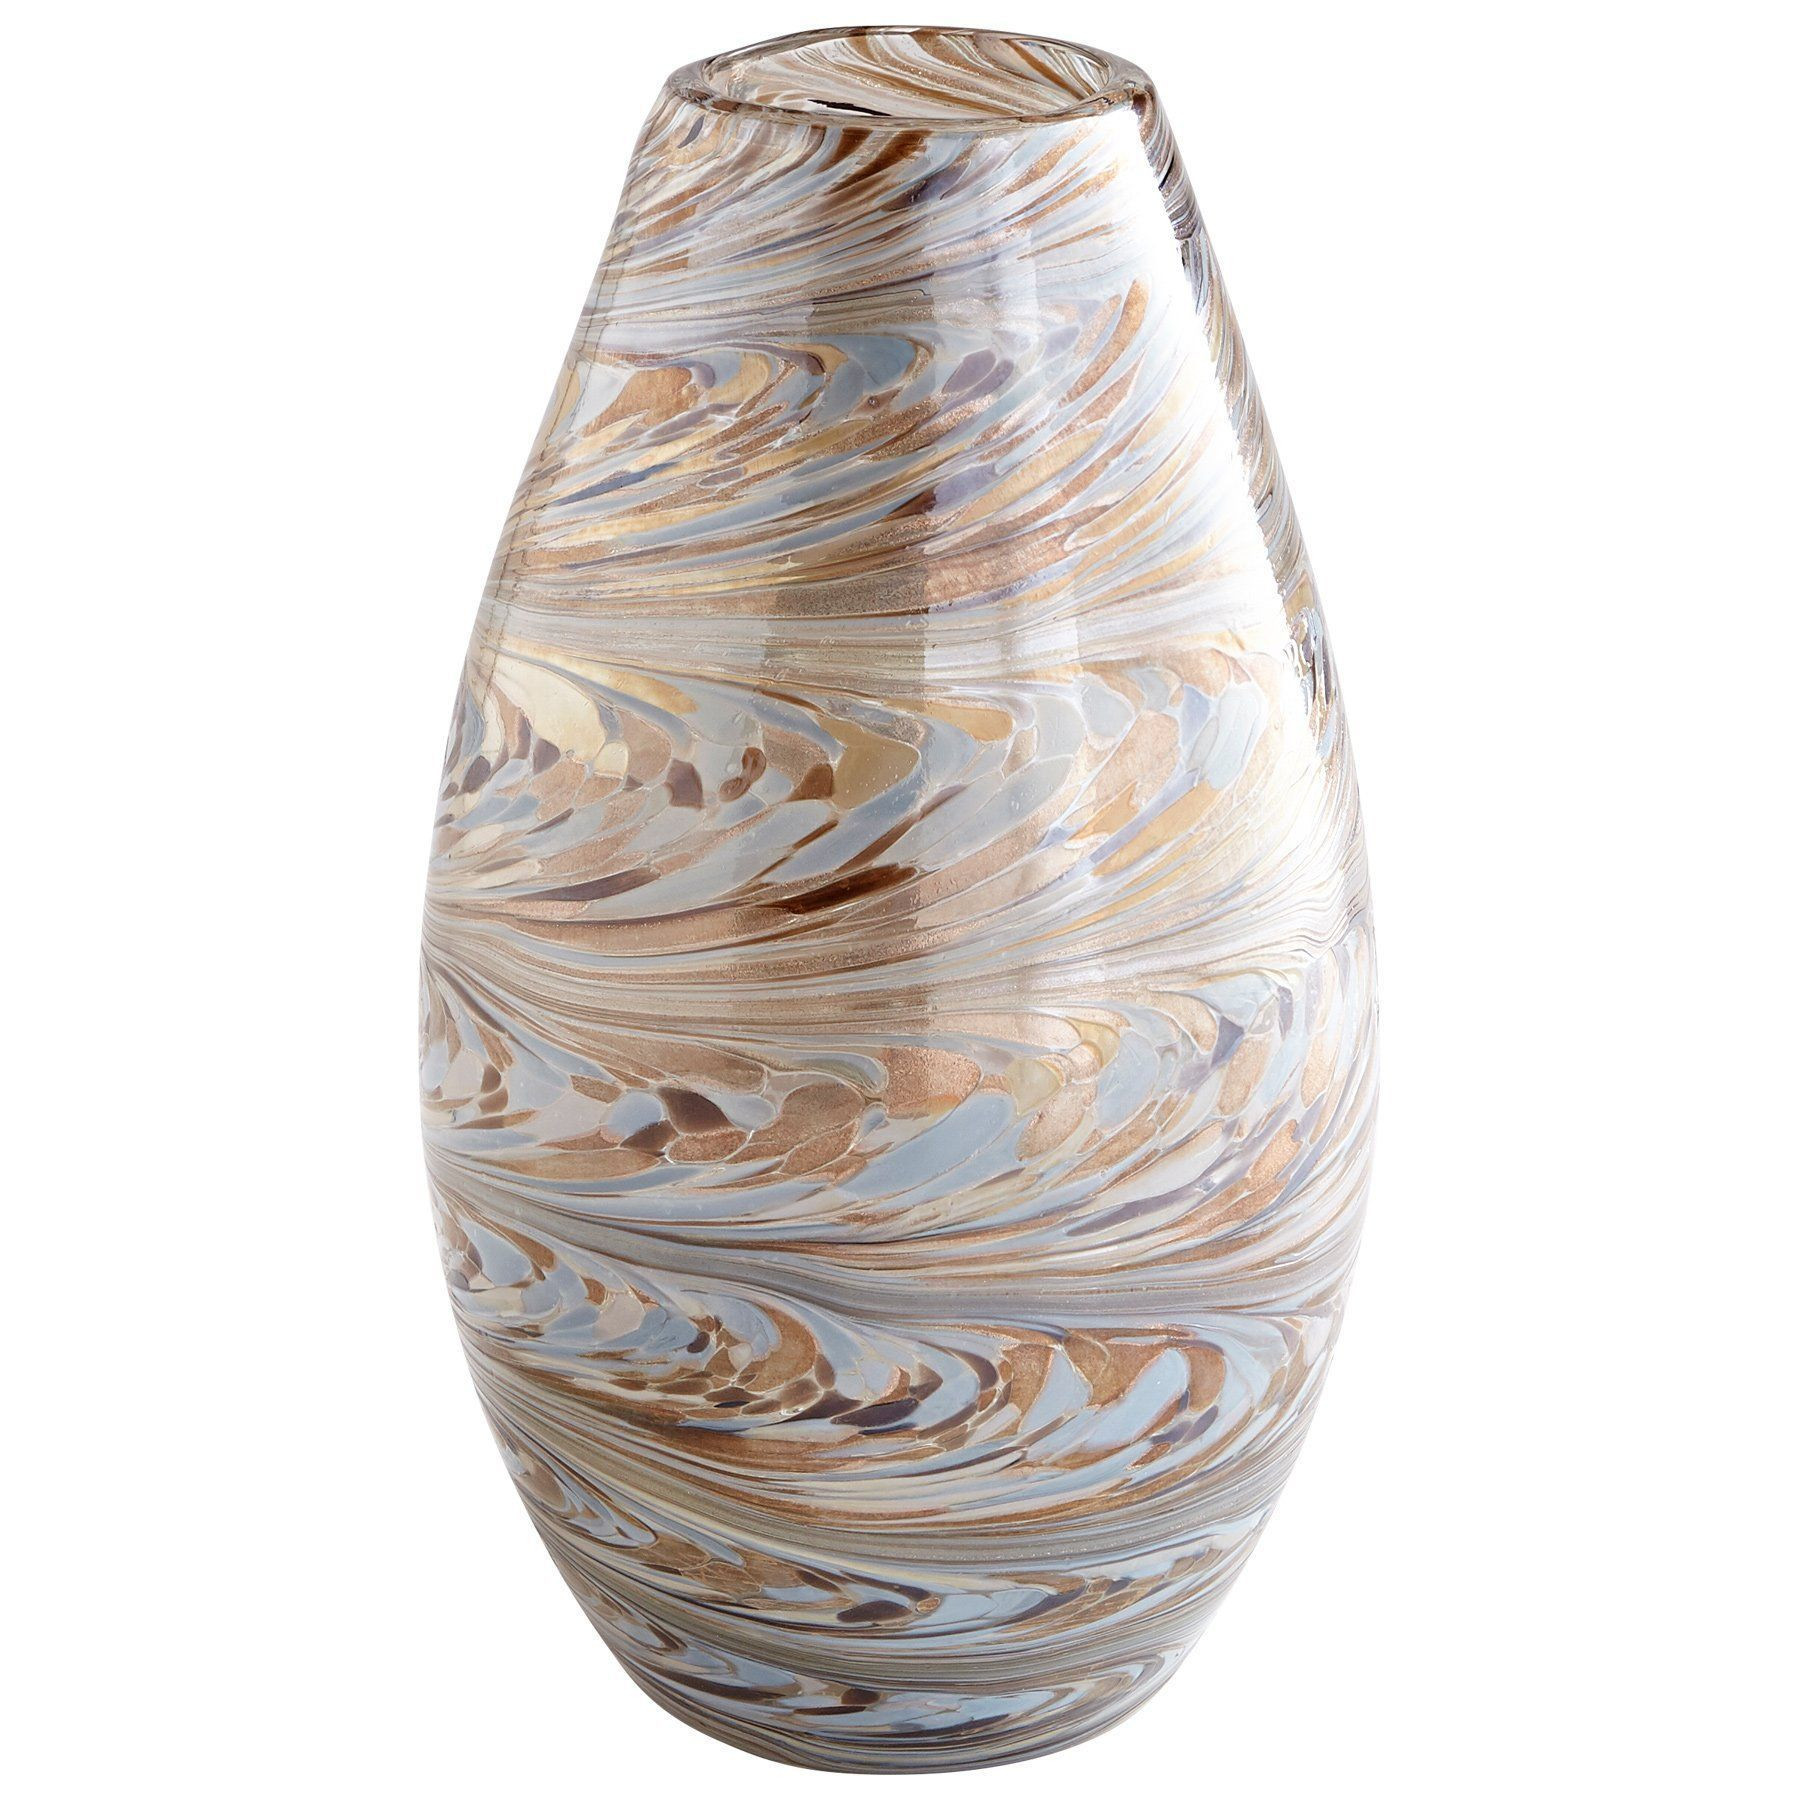 17 Ideal Chrome Floor Vase 2024 free download chrome floor vase of 44 gold and silver vase the weekly world for caravelas small gold silver metallic sand swirl art glass vase by